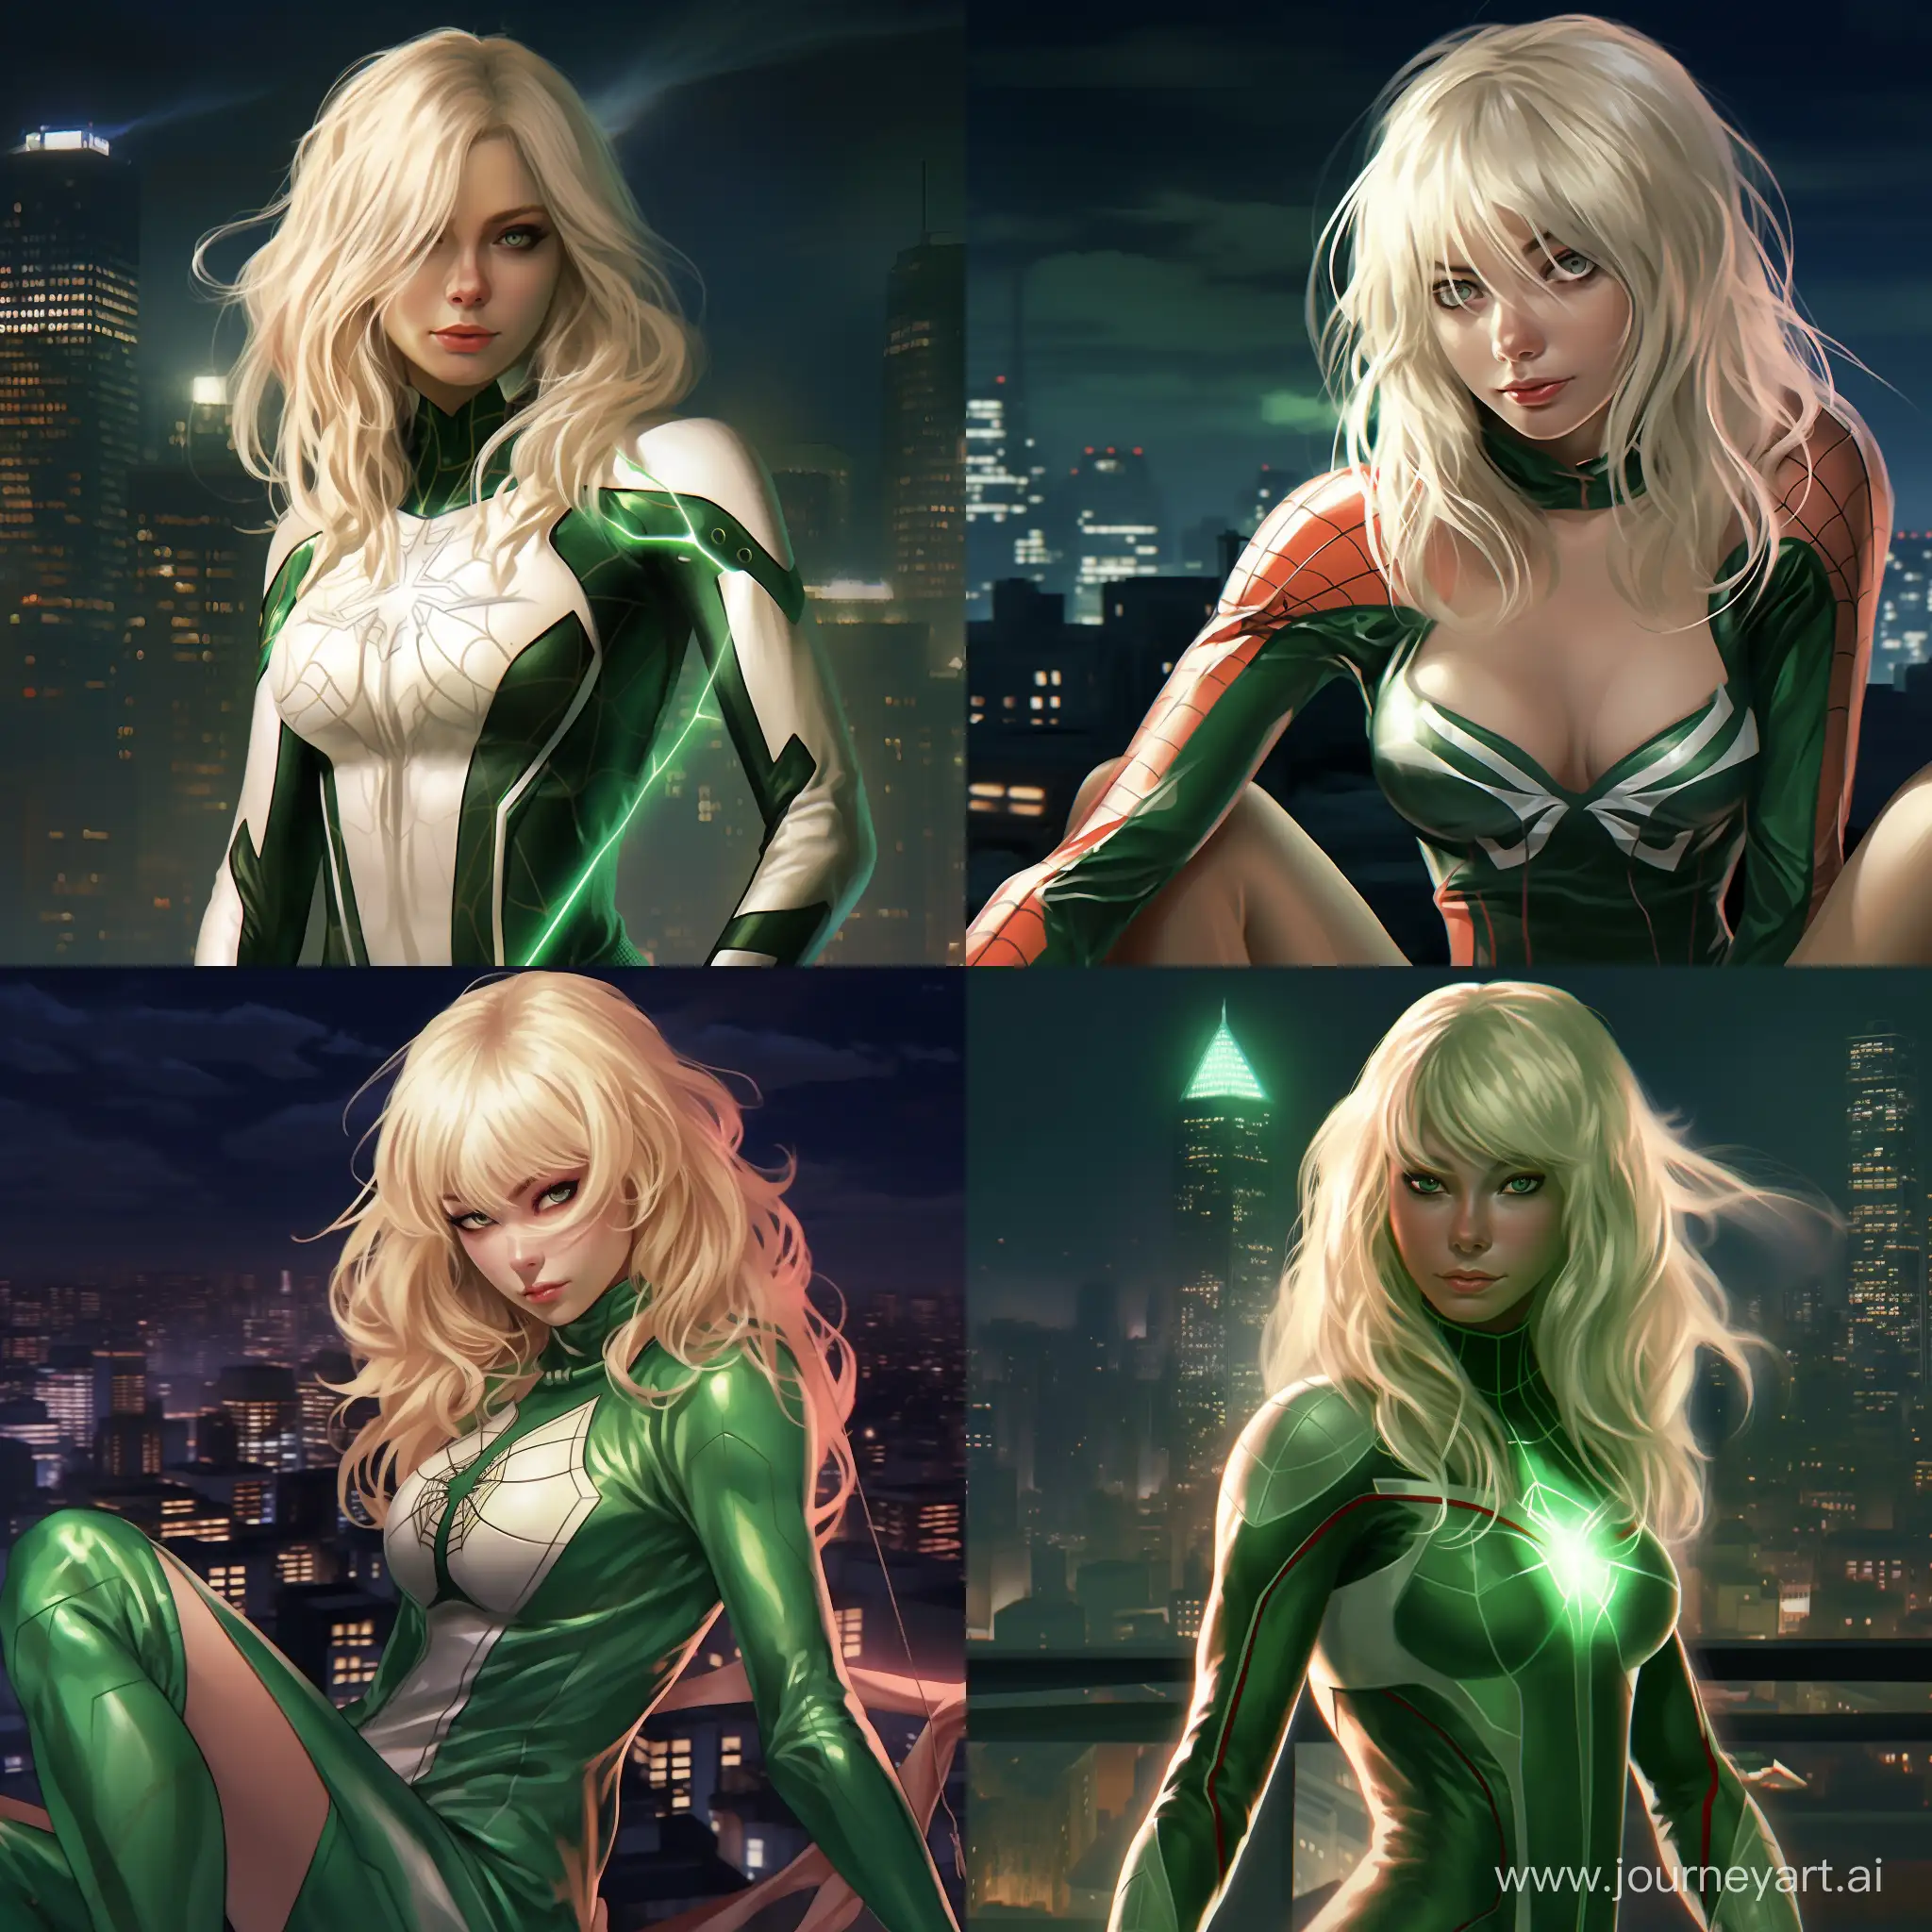 1 girl blonde in a green Spider-Man costume, On the chest is a large outline of a white spider. In the background is the city at night. 